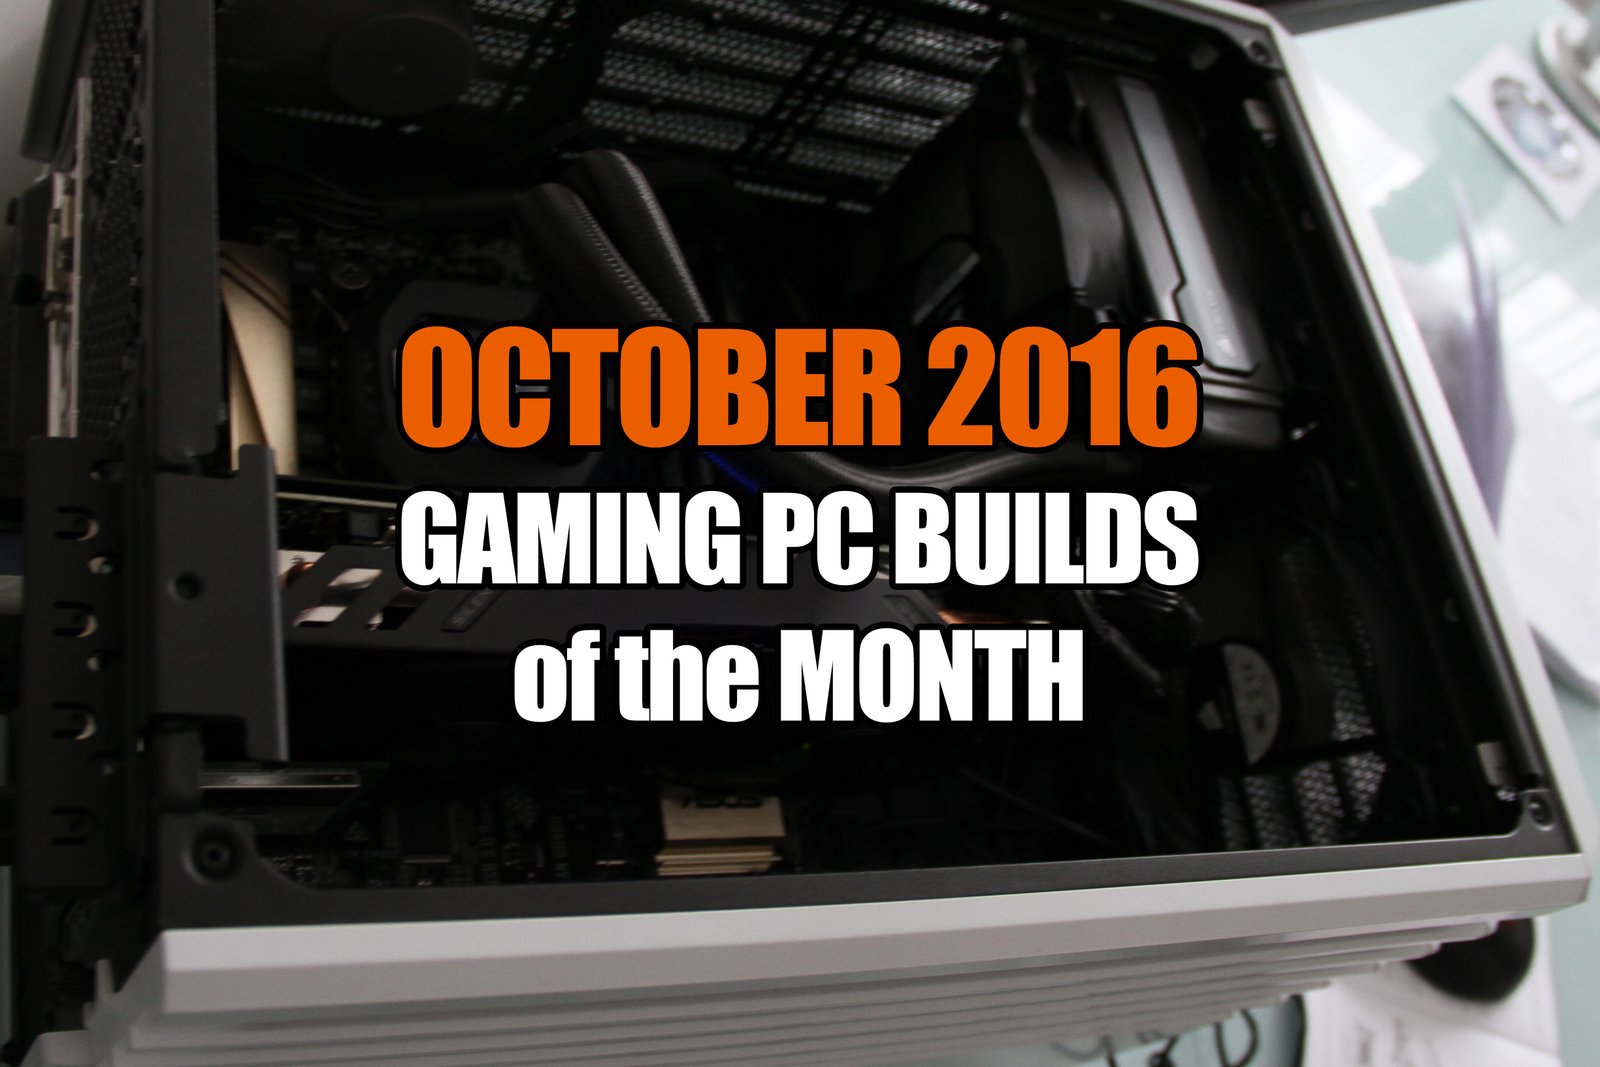 Gaming PC Build 2016 for October $600 $1000 and $1300